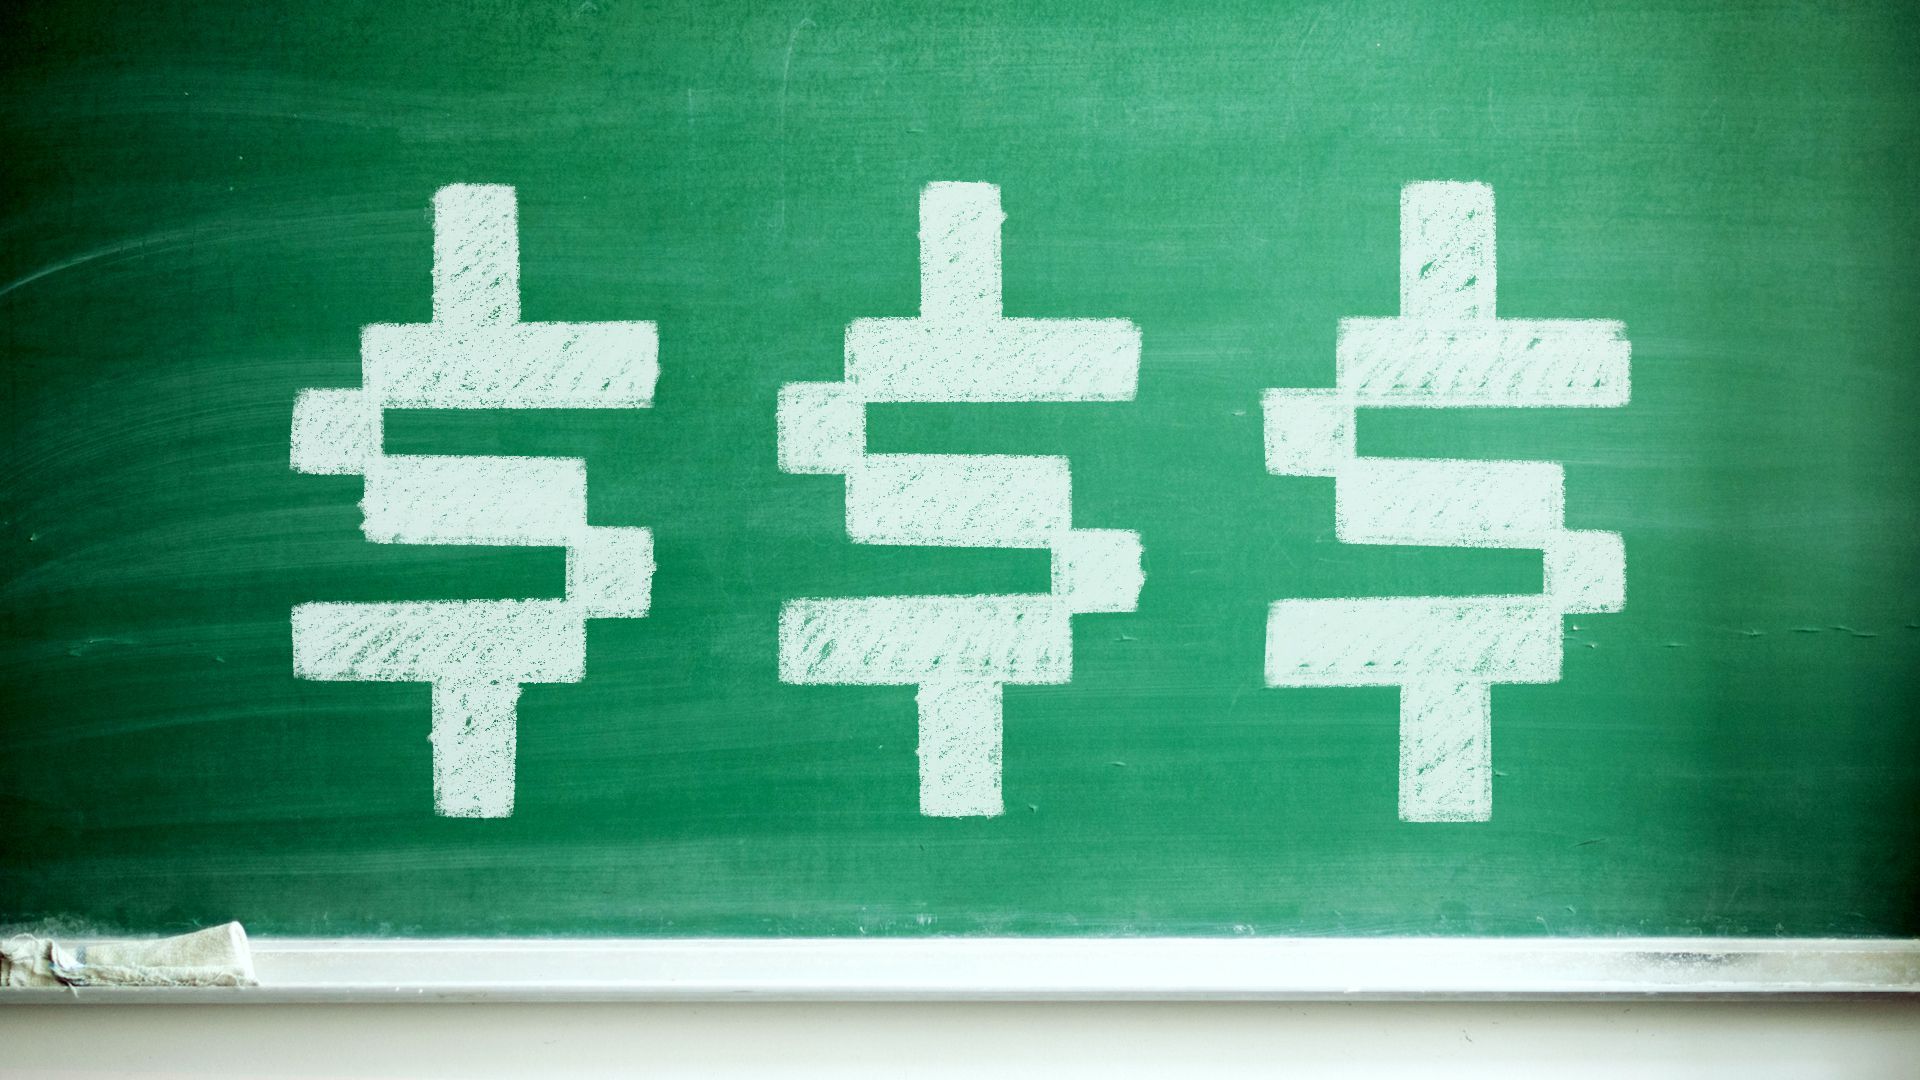 Illustration of a chalkboard with three digital-style dollar signs on it.